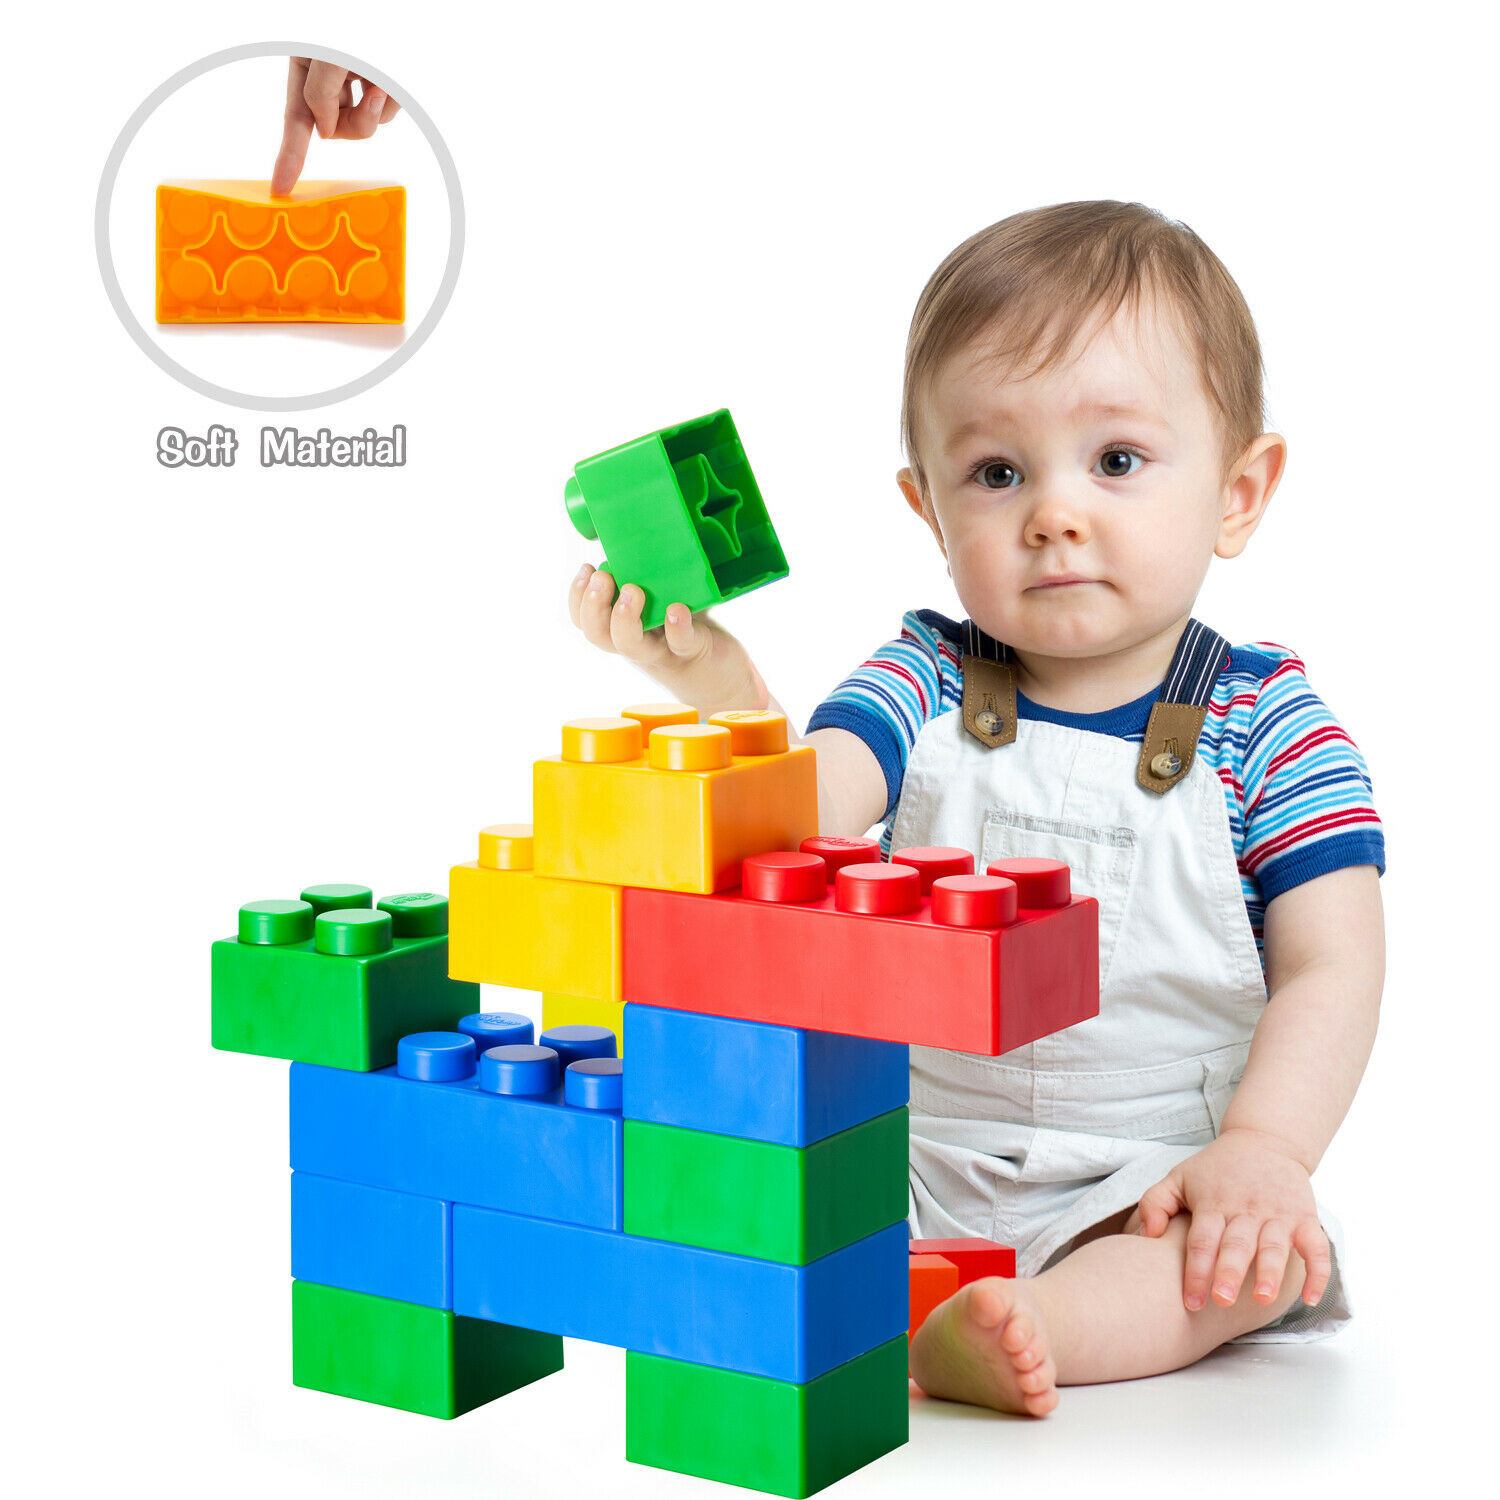 UNiPLAY Jumbo Soft Building Blocks for Ages 3 Months &Up Toddler and Baby